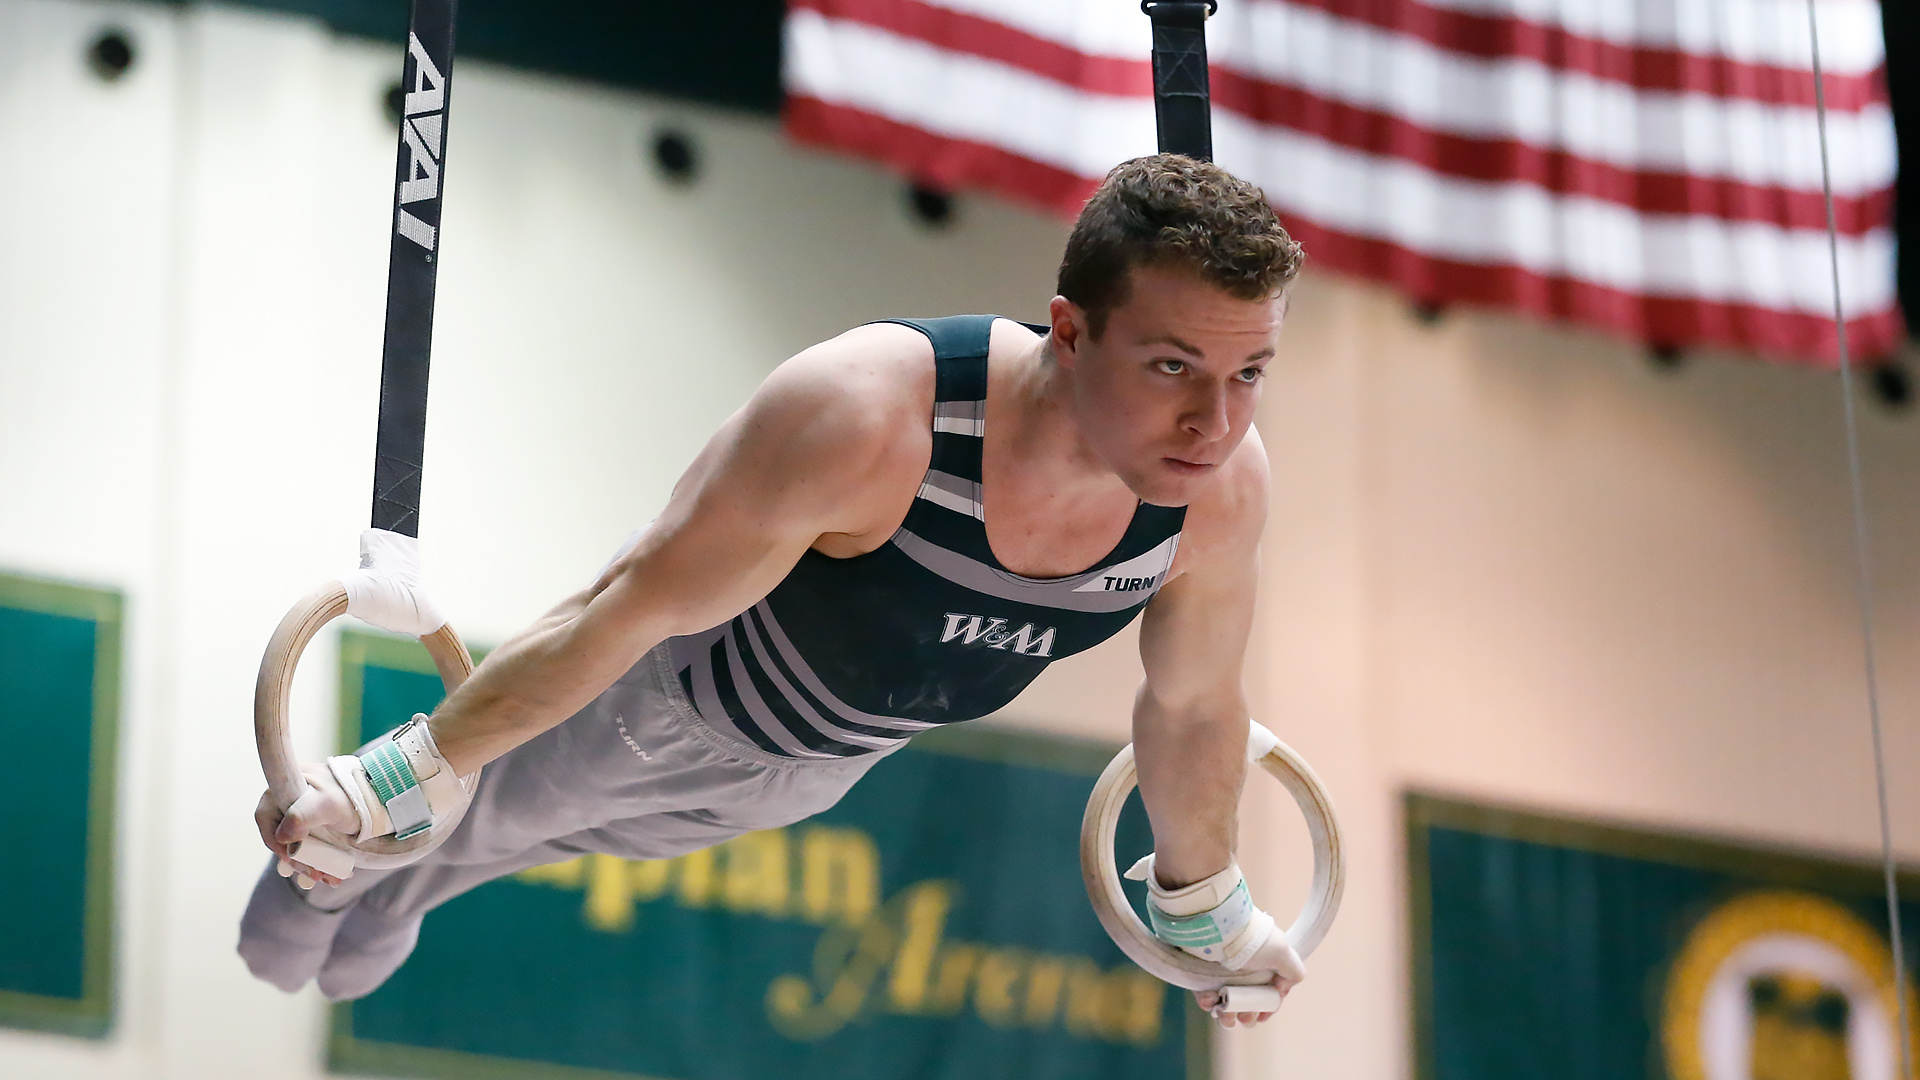 Rings (Gymnastics): Jack Hasenkopf, NCAA Championships individual qualifier, William and Mary Athletics. 1920x1080 Full HD Wallpaper.